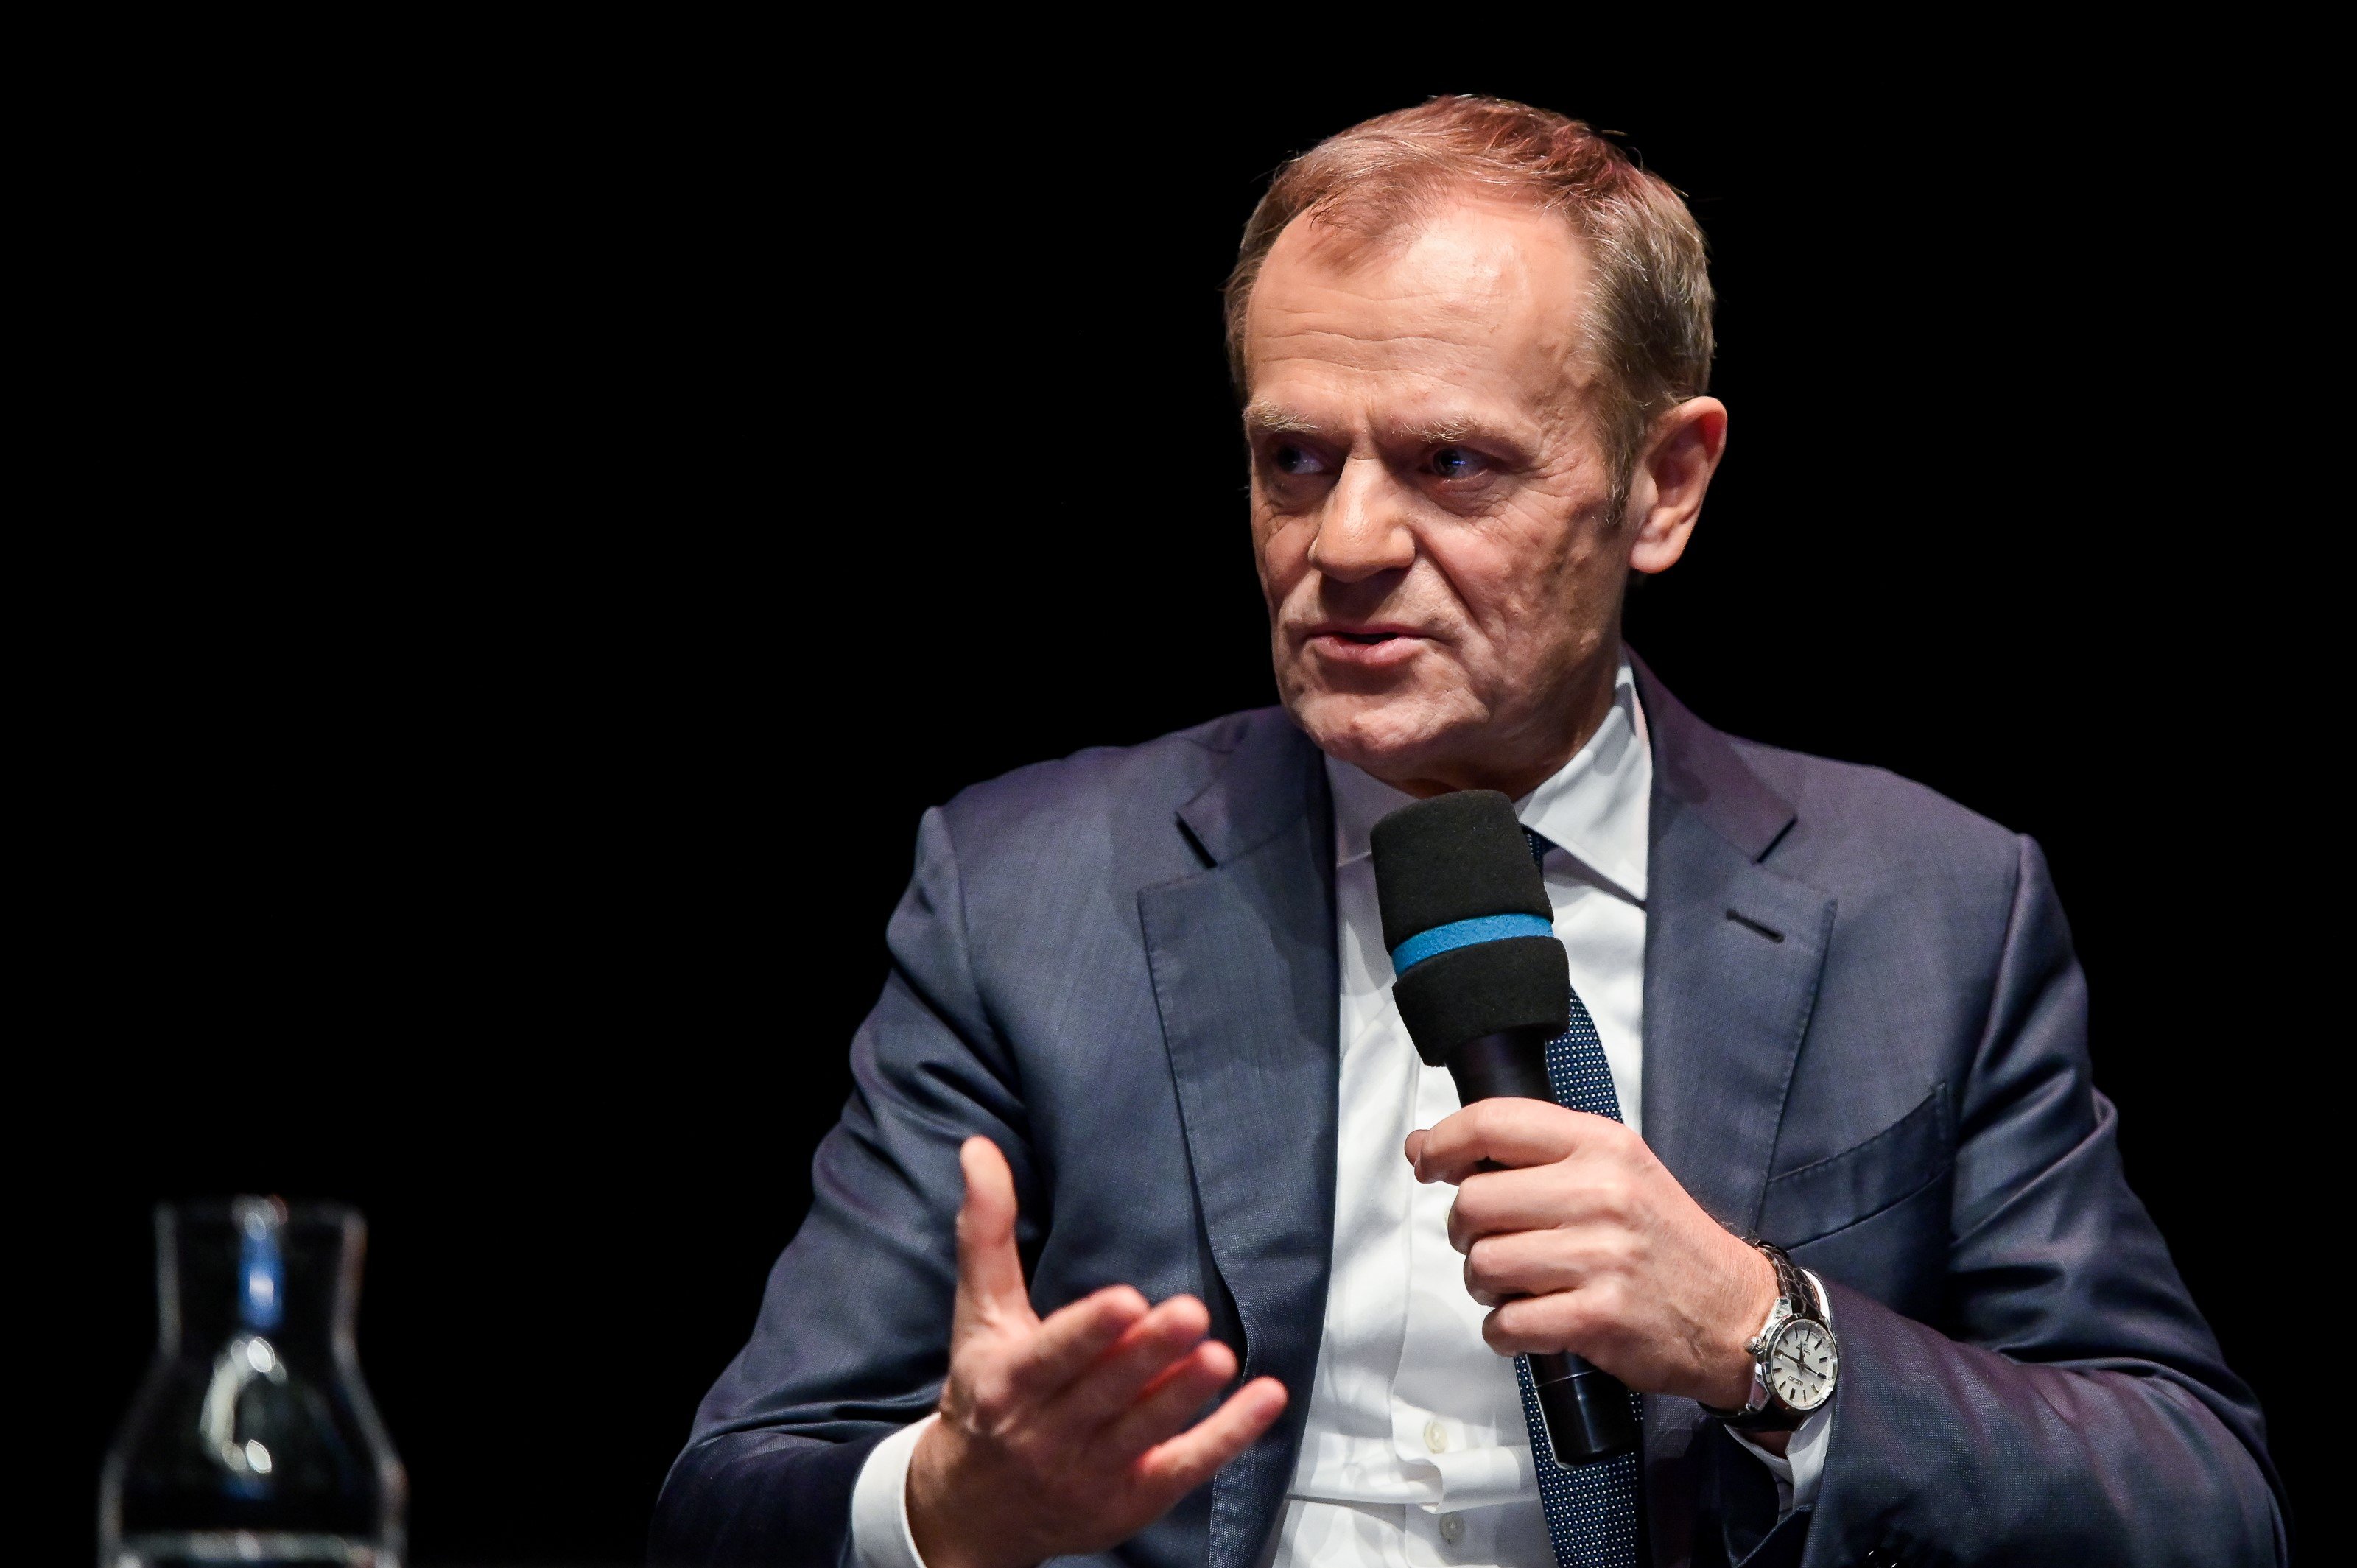 EuropaPress 2556917 18 December 2019 Poland Danzig Donald Tusk Former President of the European Council and Presidente of the European People's Party speaks during en promotional event for his new book at the